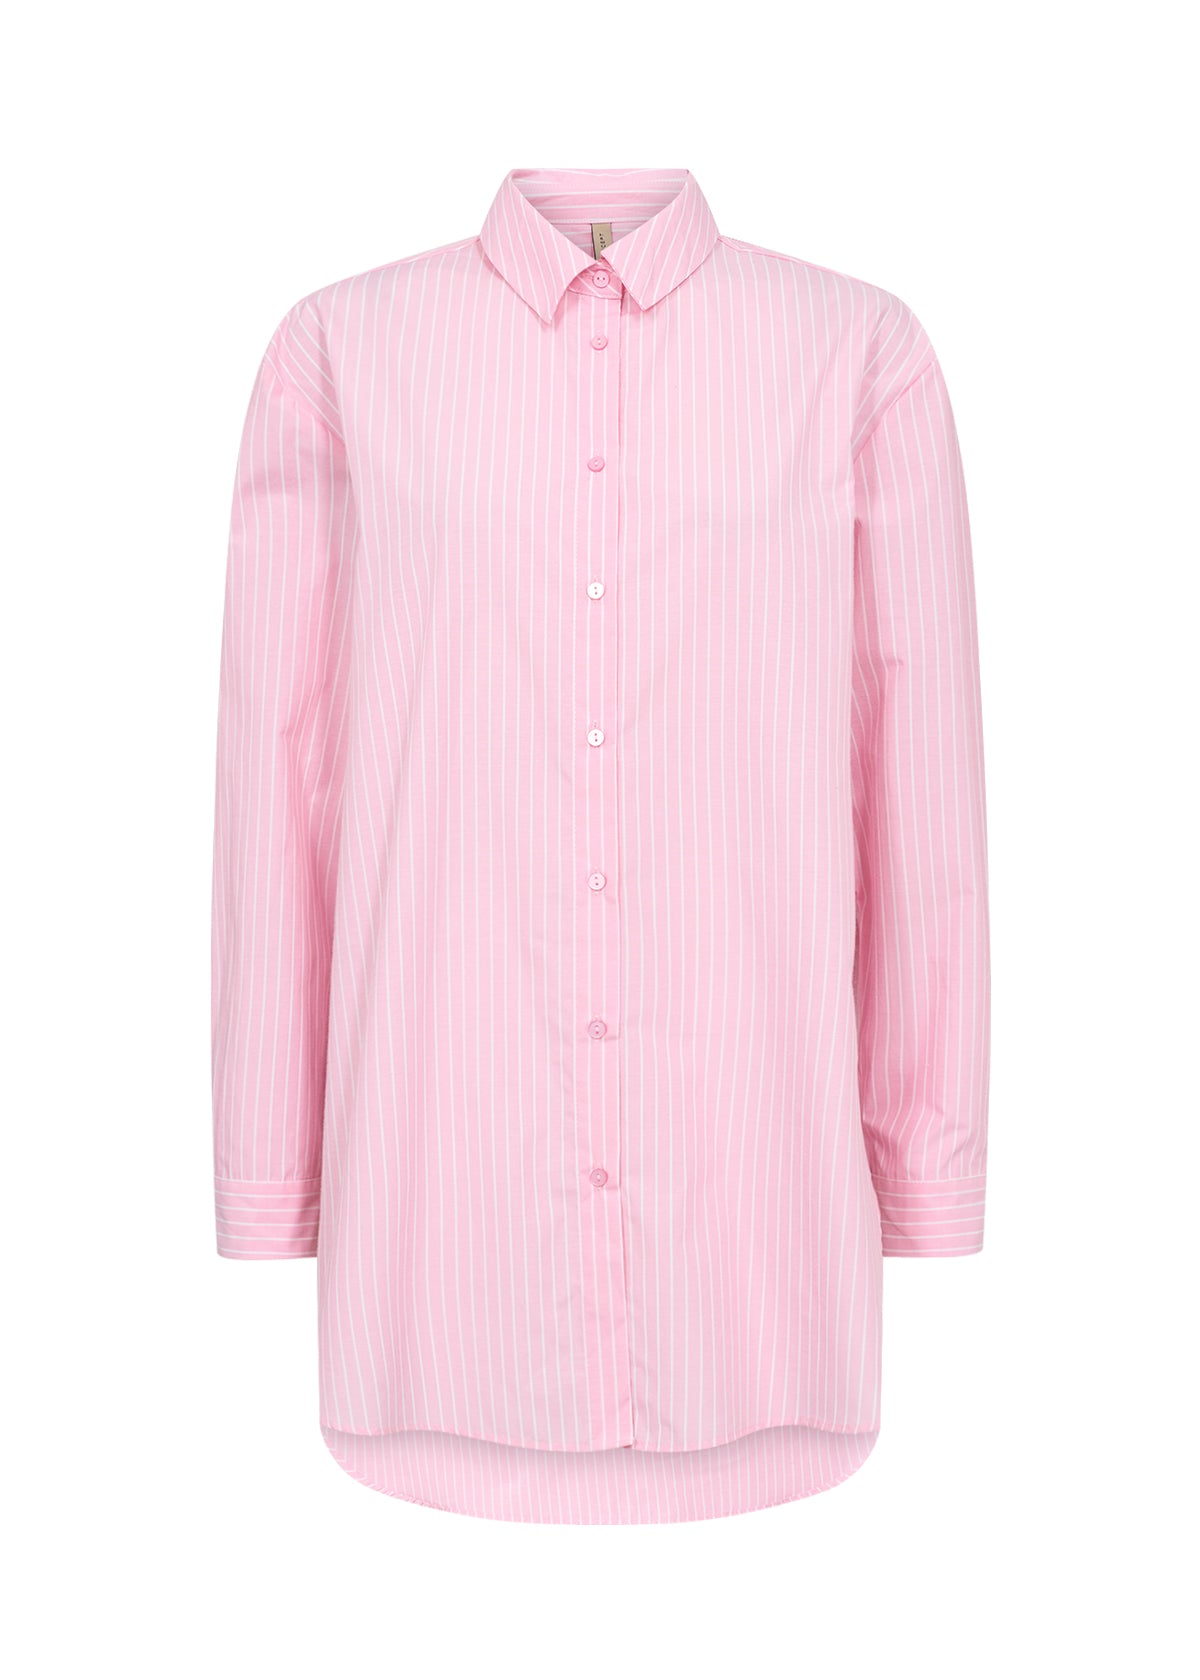 Soya Concept Dicle Pink Stripe Shirt